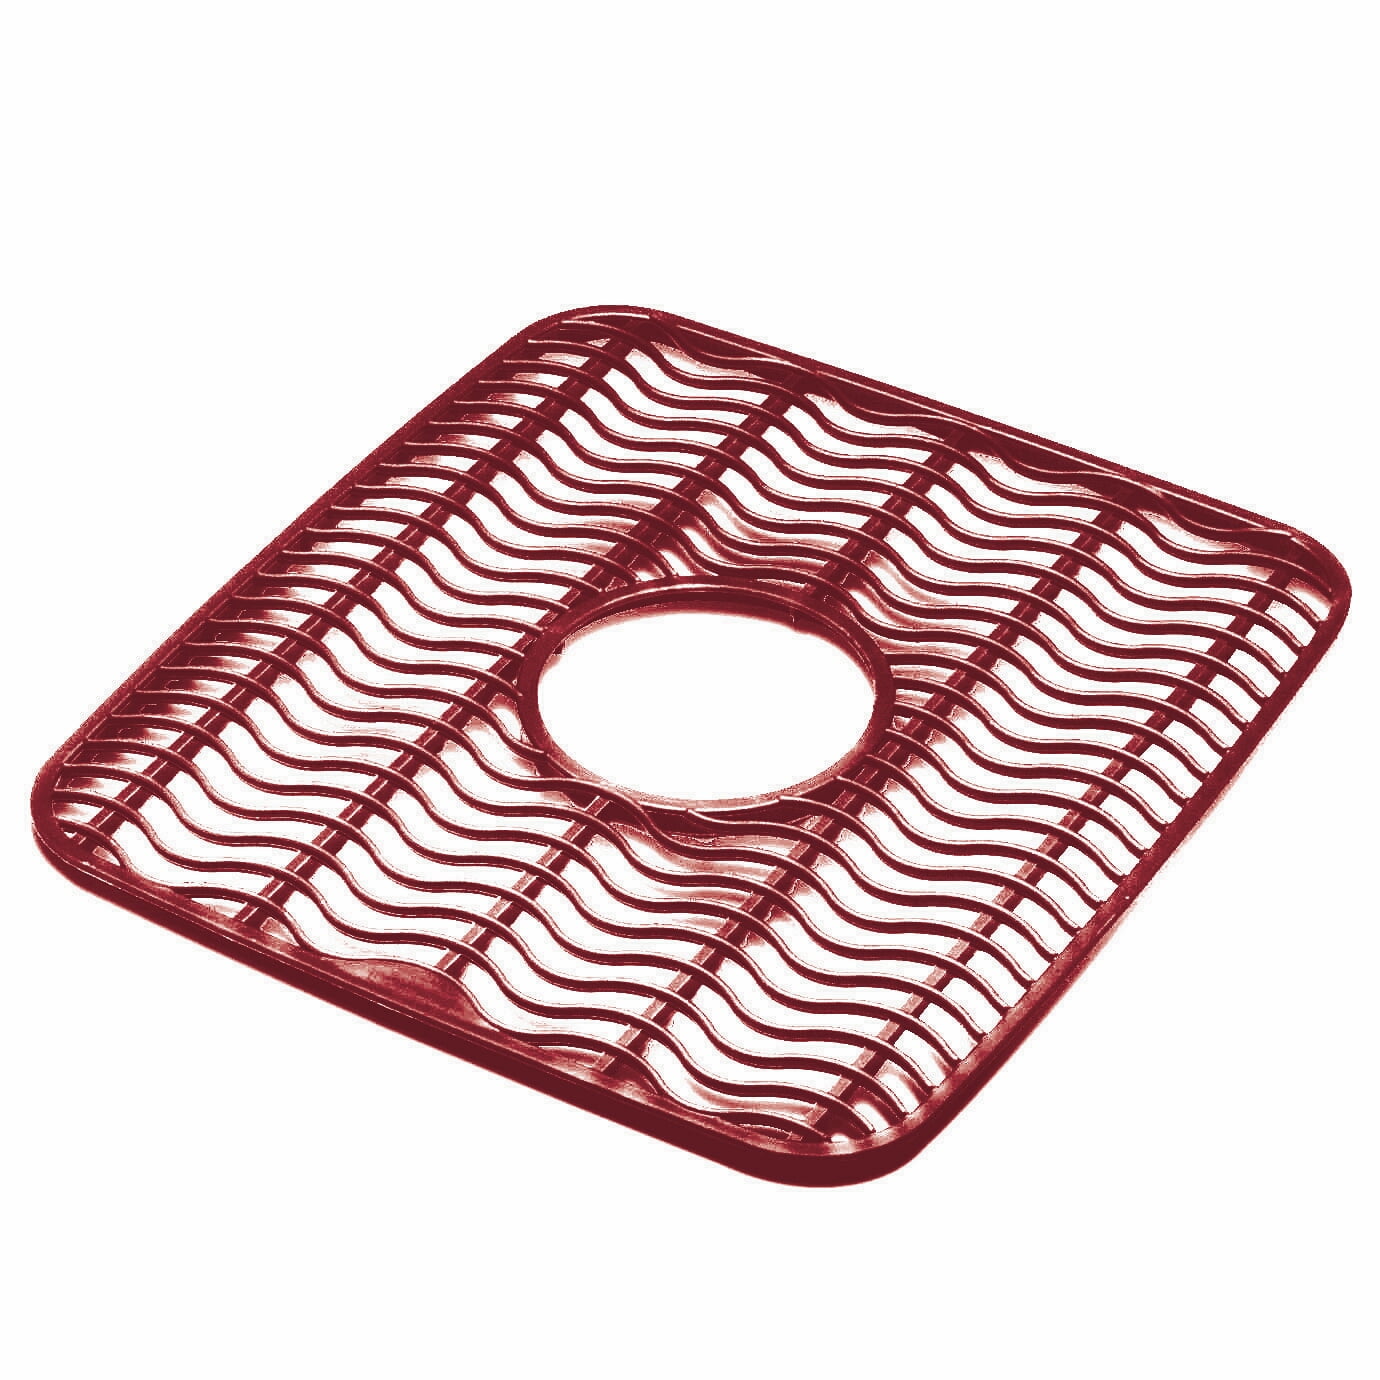 Rubbermaid Small Kitchen Sink Protector, Red 